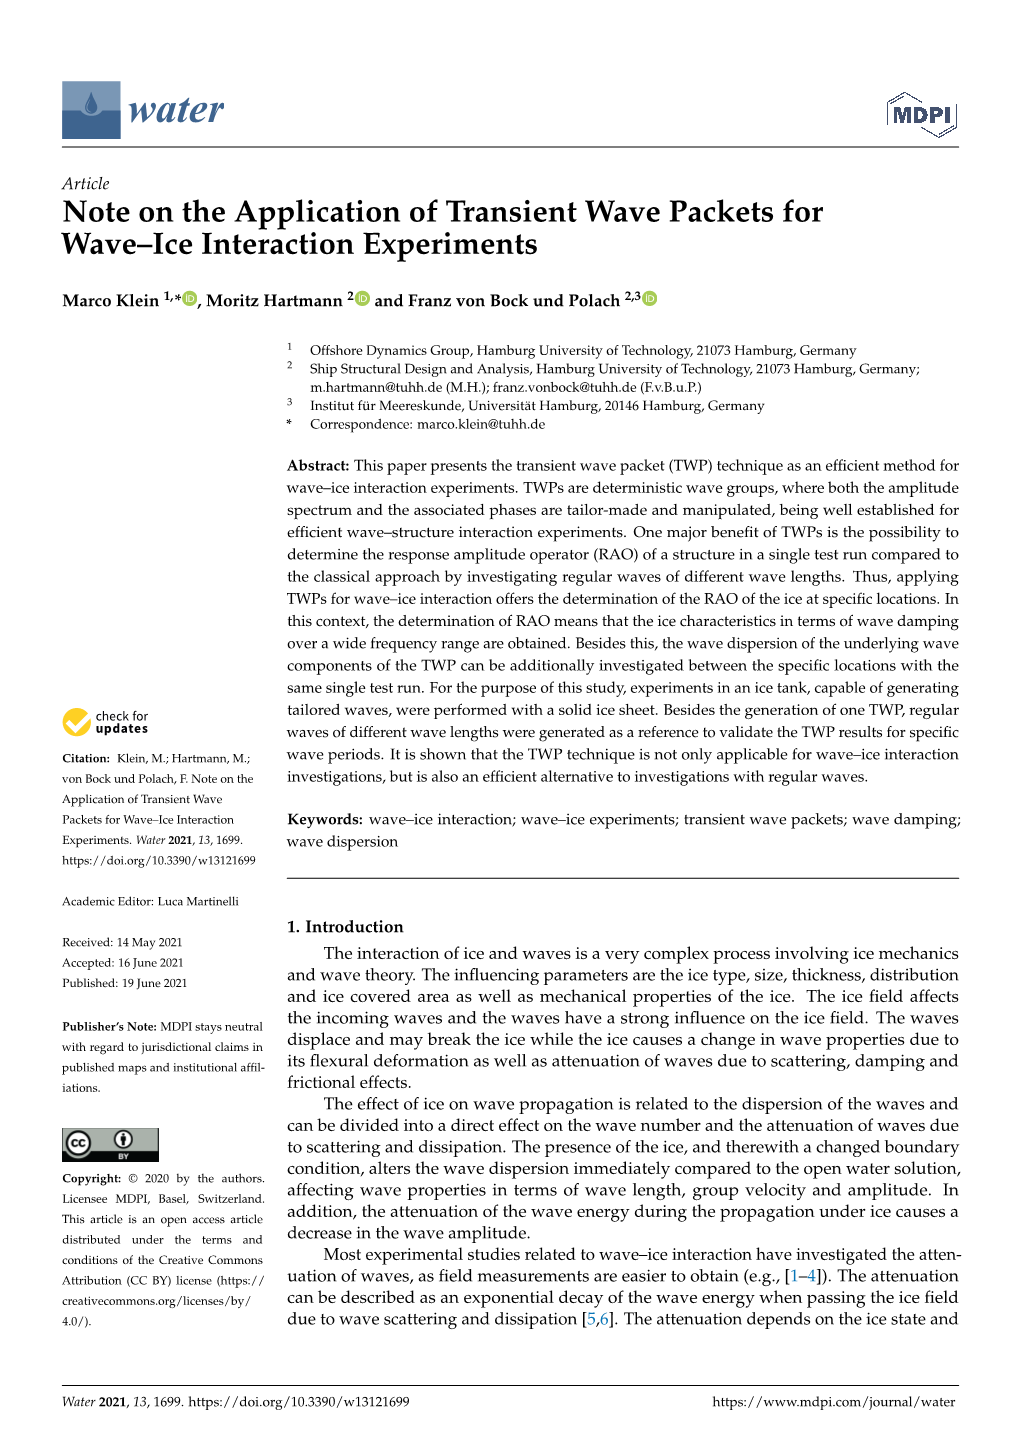 Note on the Application of Transient Wave Packets for Wave–Ice Interaction Experiments